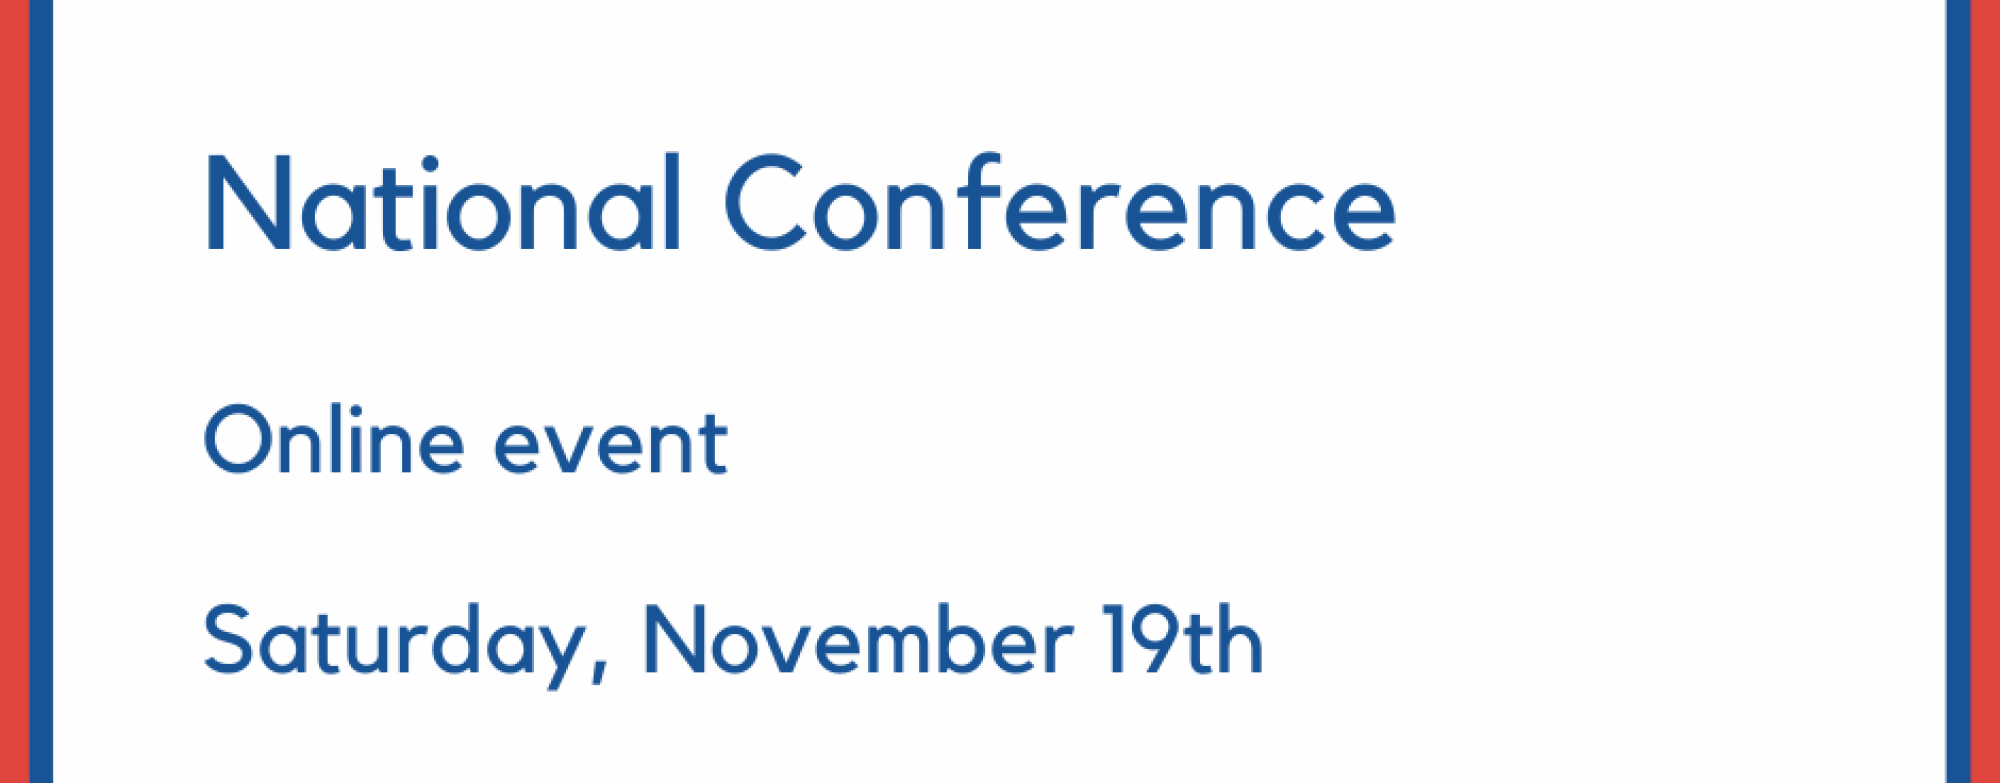 A Save the Date for MS Ireland National Conference, red and blue text on white background with details of the conference and the MS Ireland logo